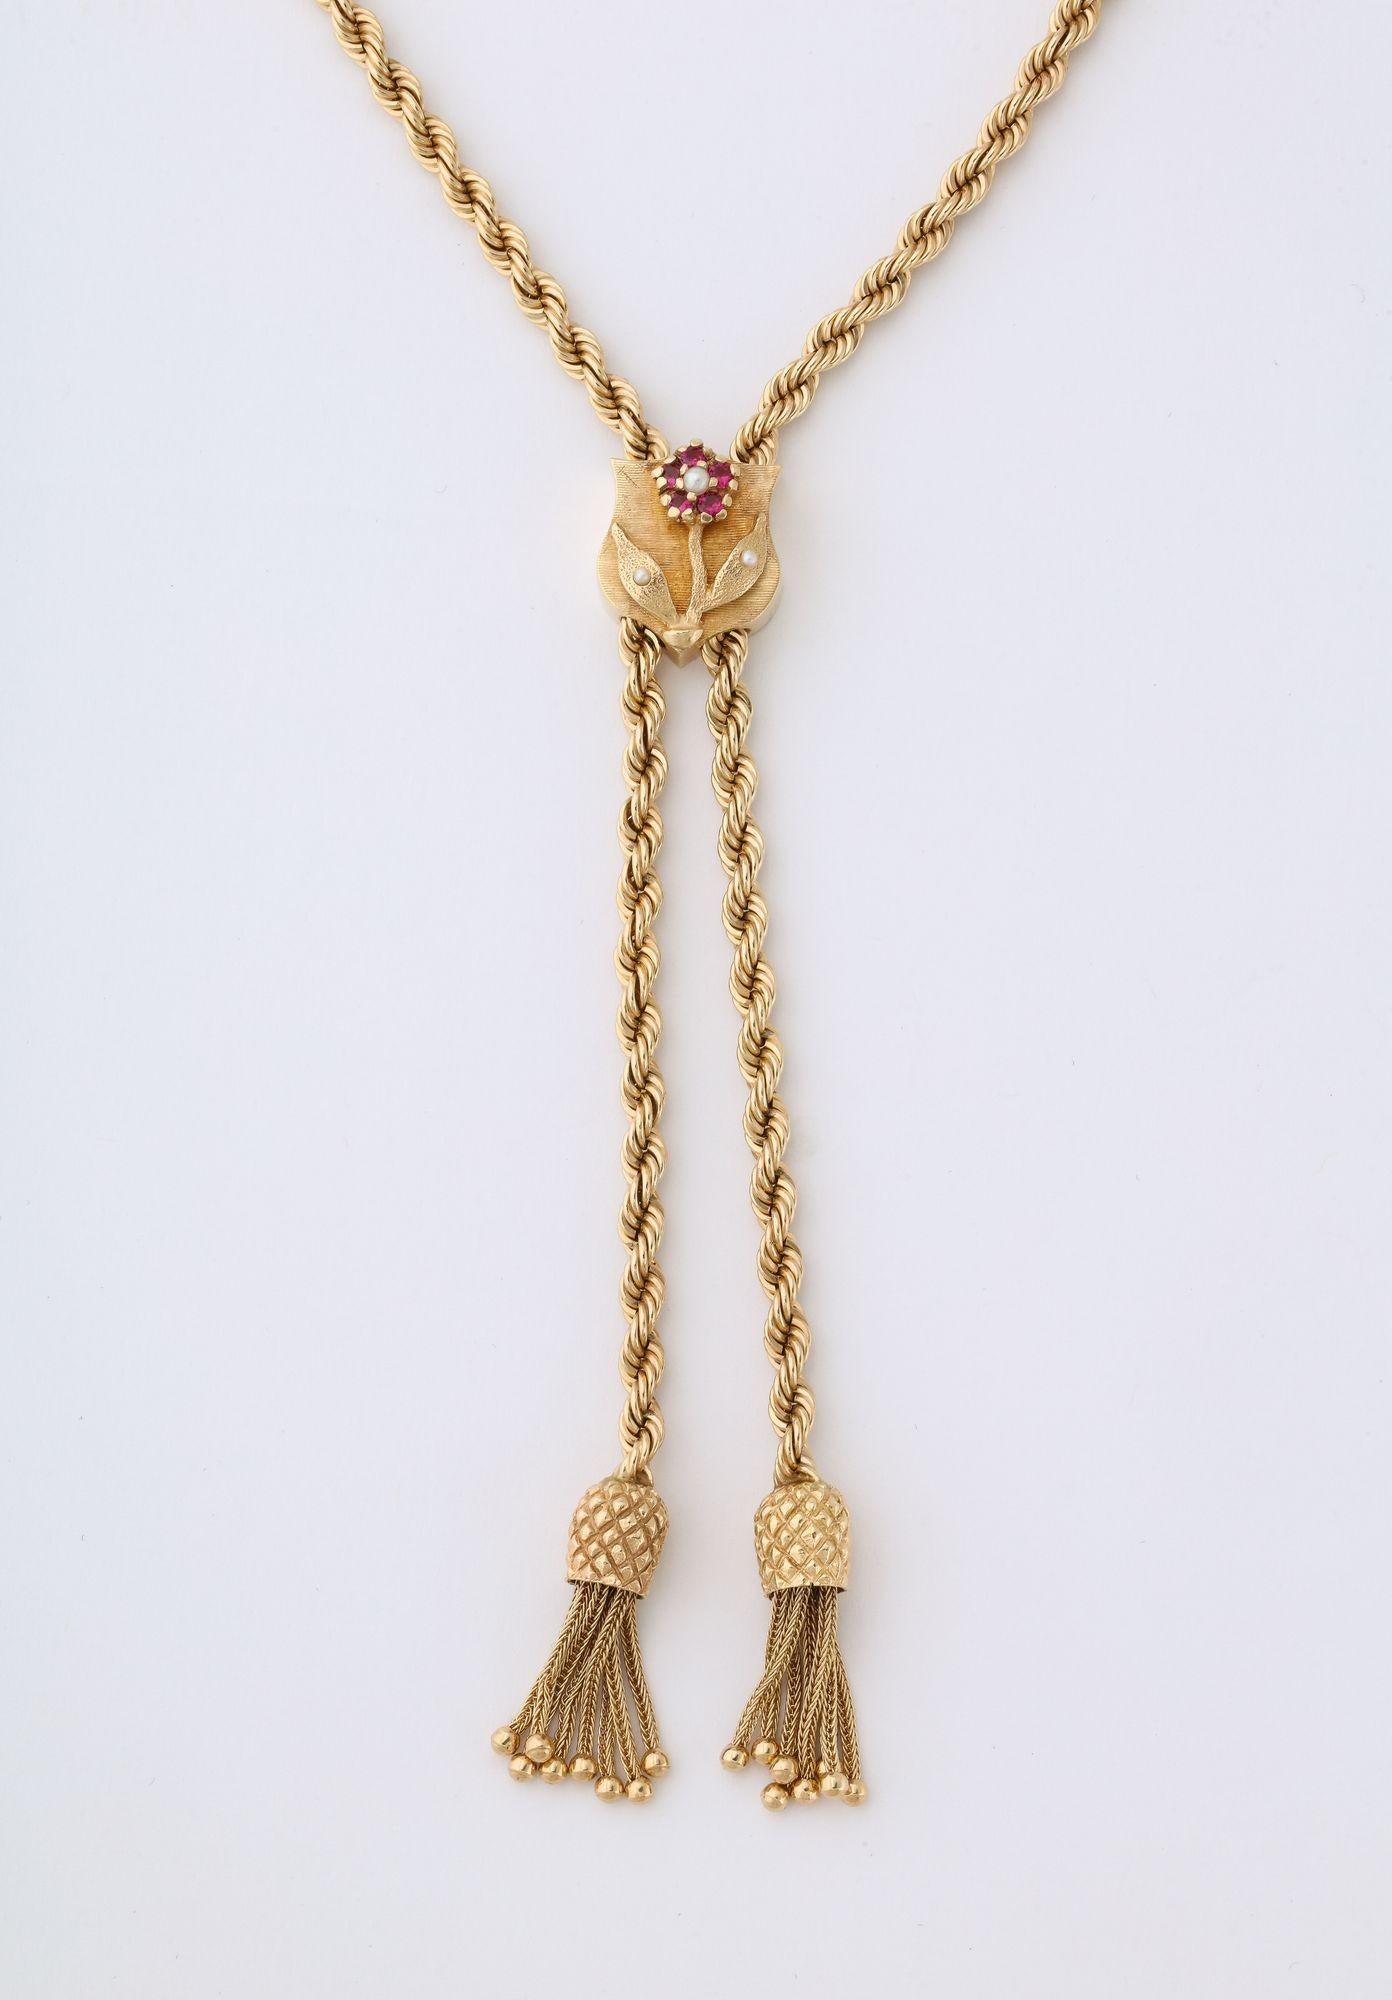 A Retro14k Gold Lariat on Rope Twist Chain with Pineapple Tassels and a Ruby and Pearl flower.  Measuring 22